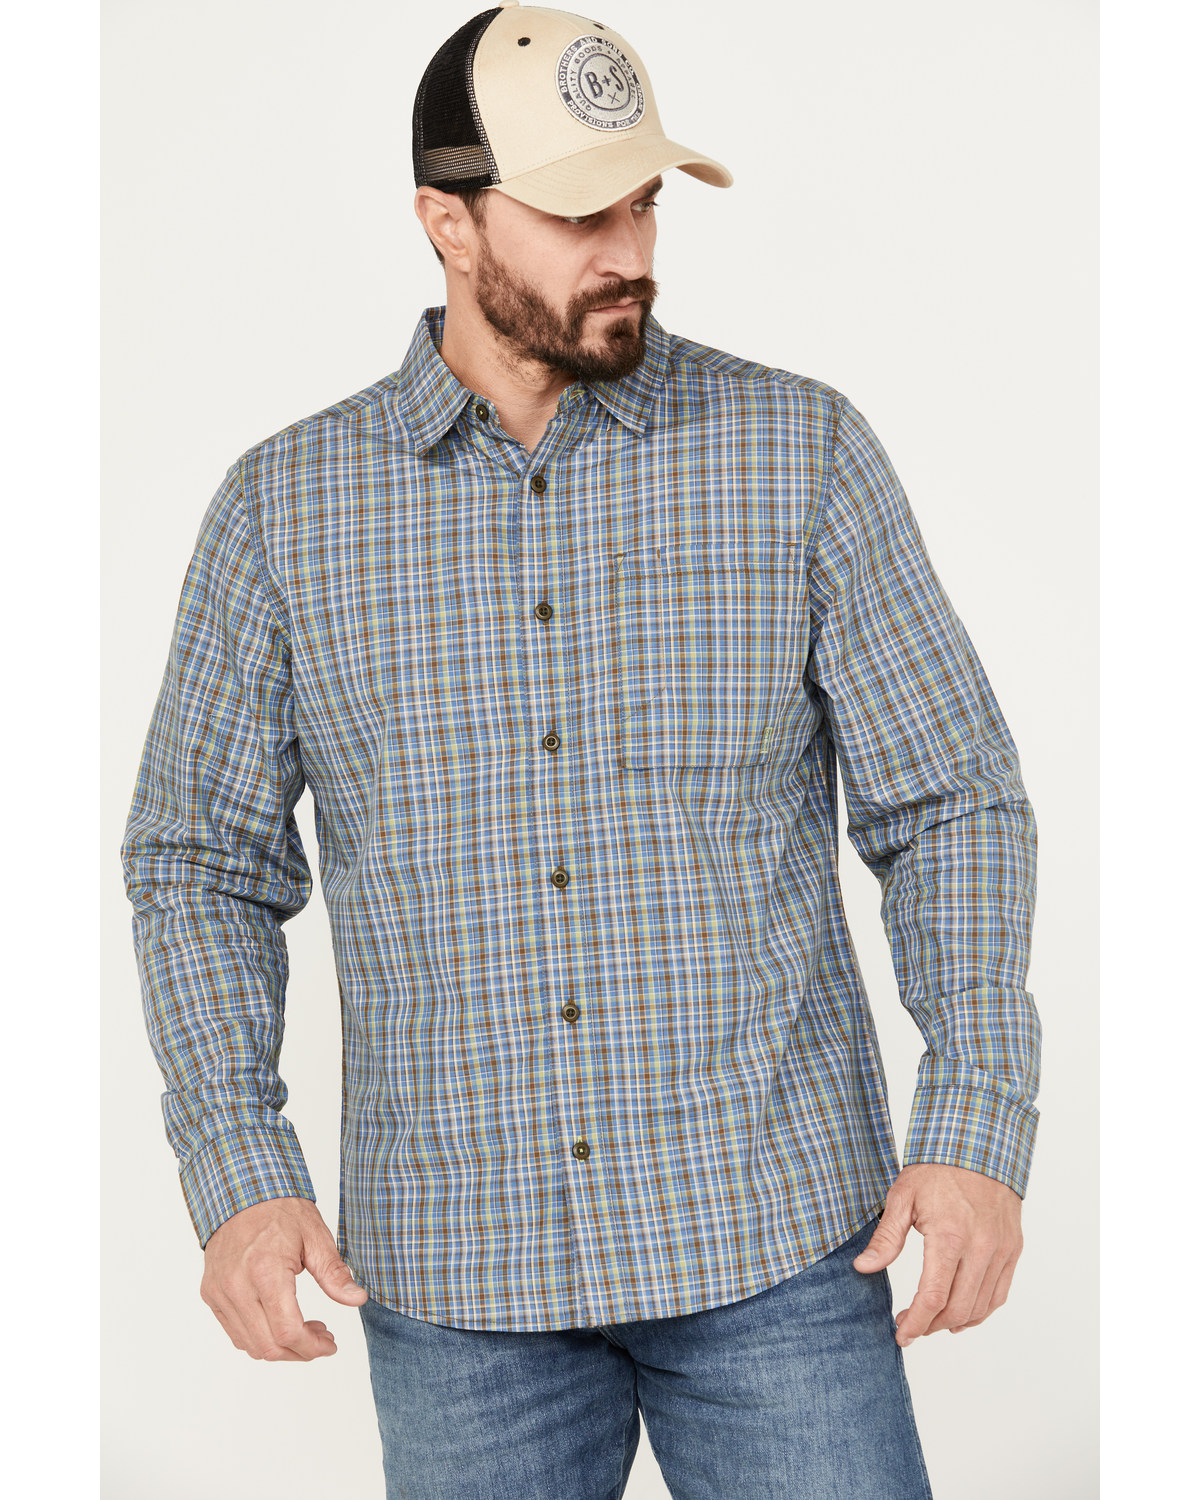 Brothers and Sons Men's Wewoka Plaid Print Long Sleeve Button-Down Western Shirt